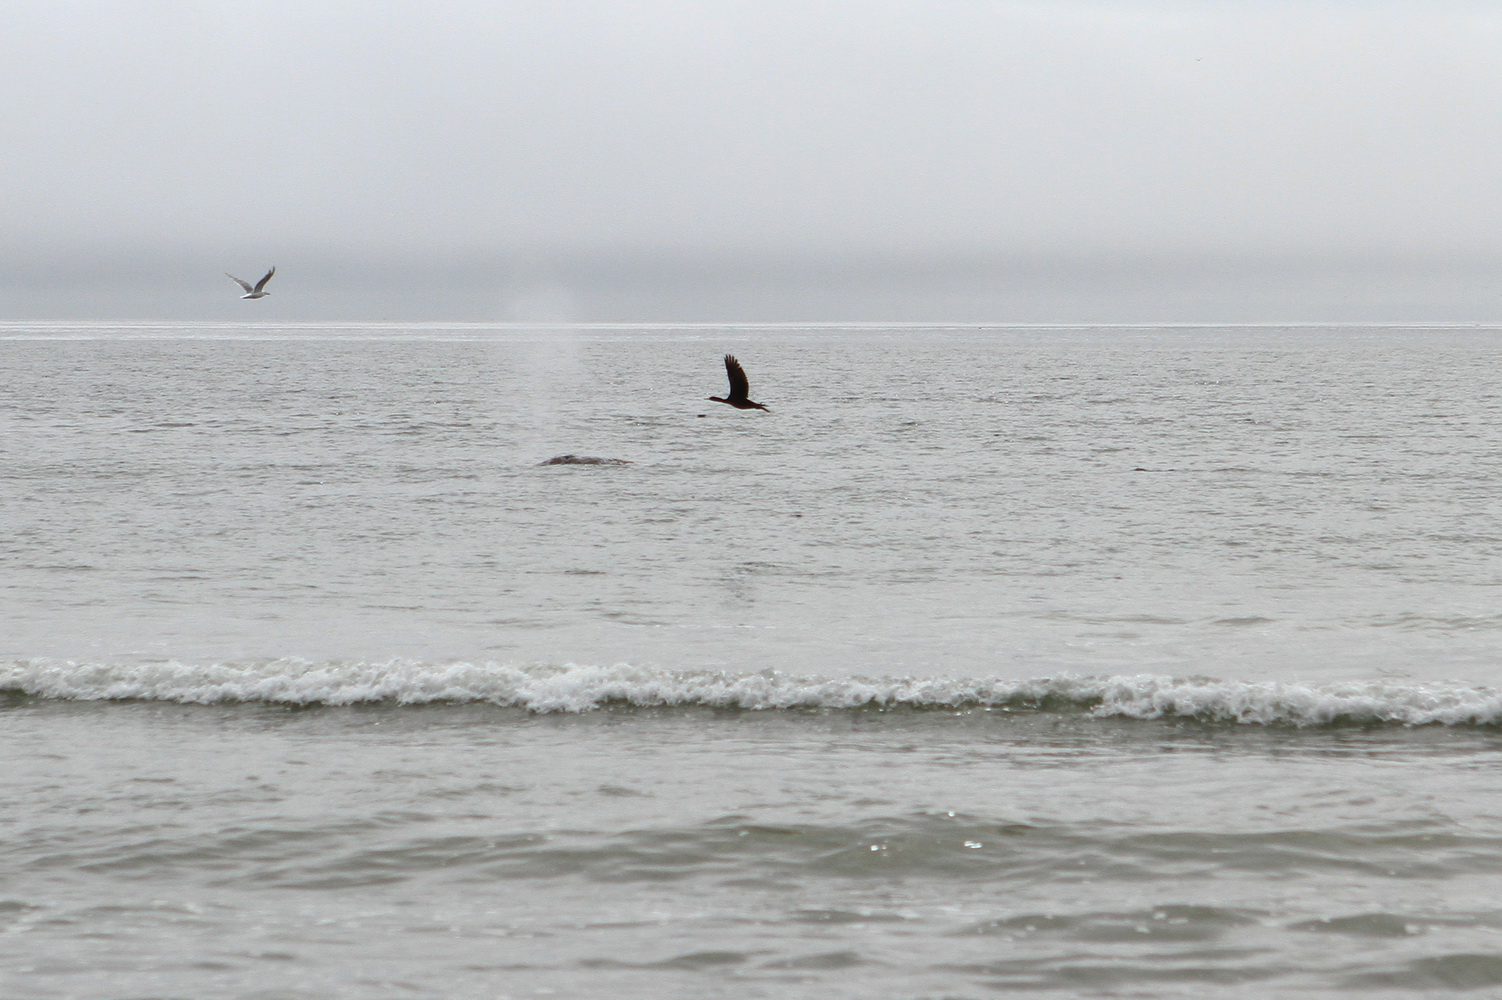 Grey whale shows its back from the water. Photo by Maria Bondar